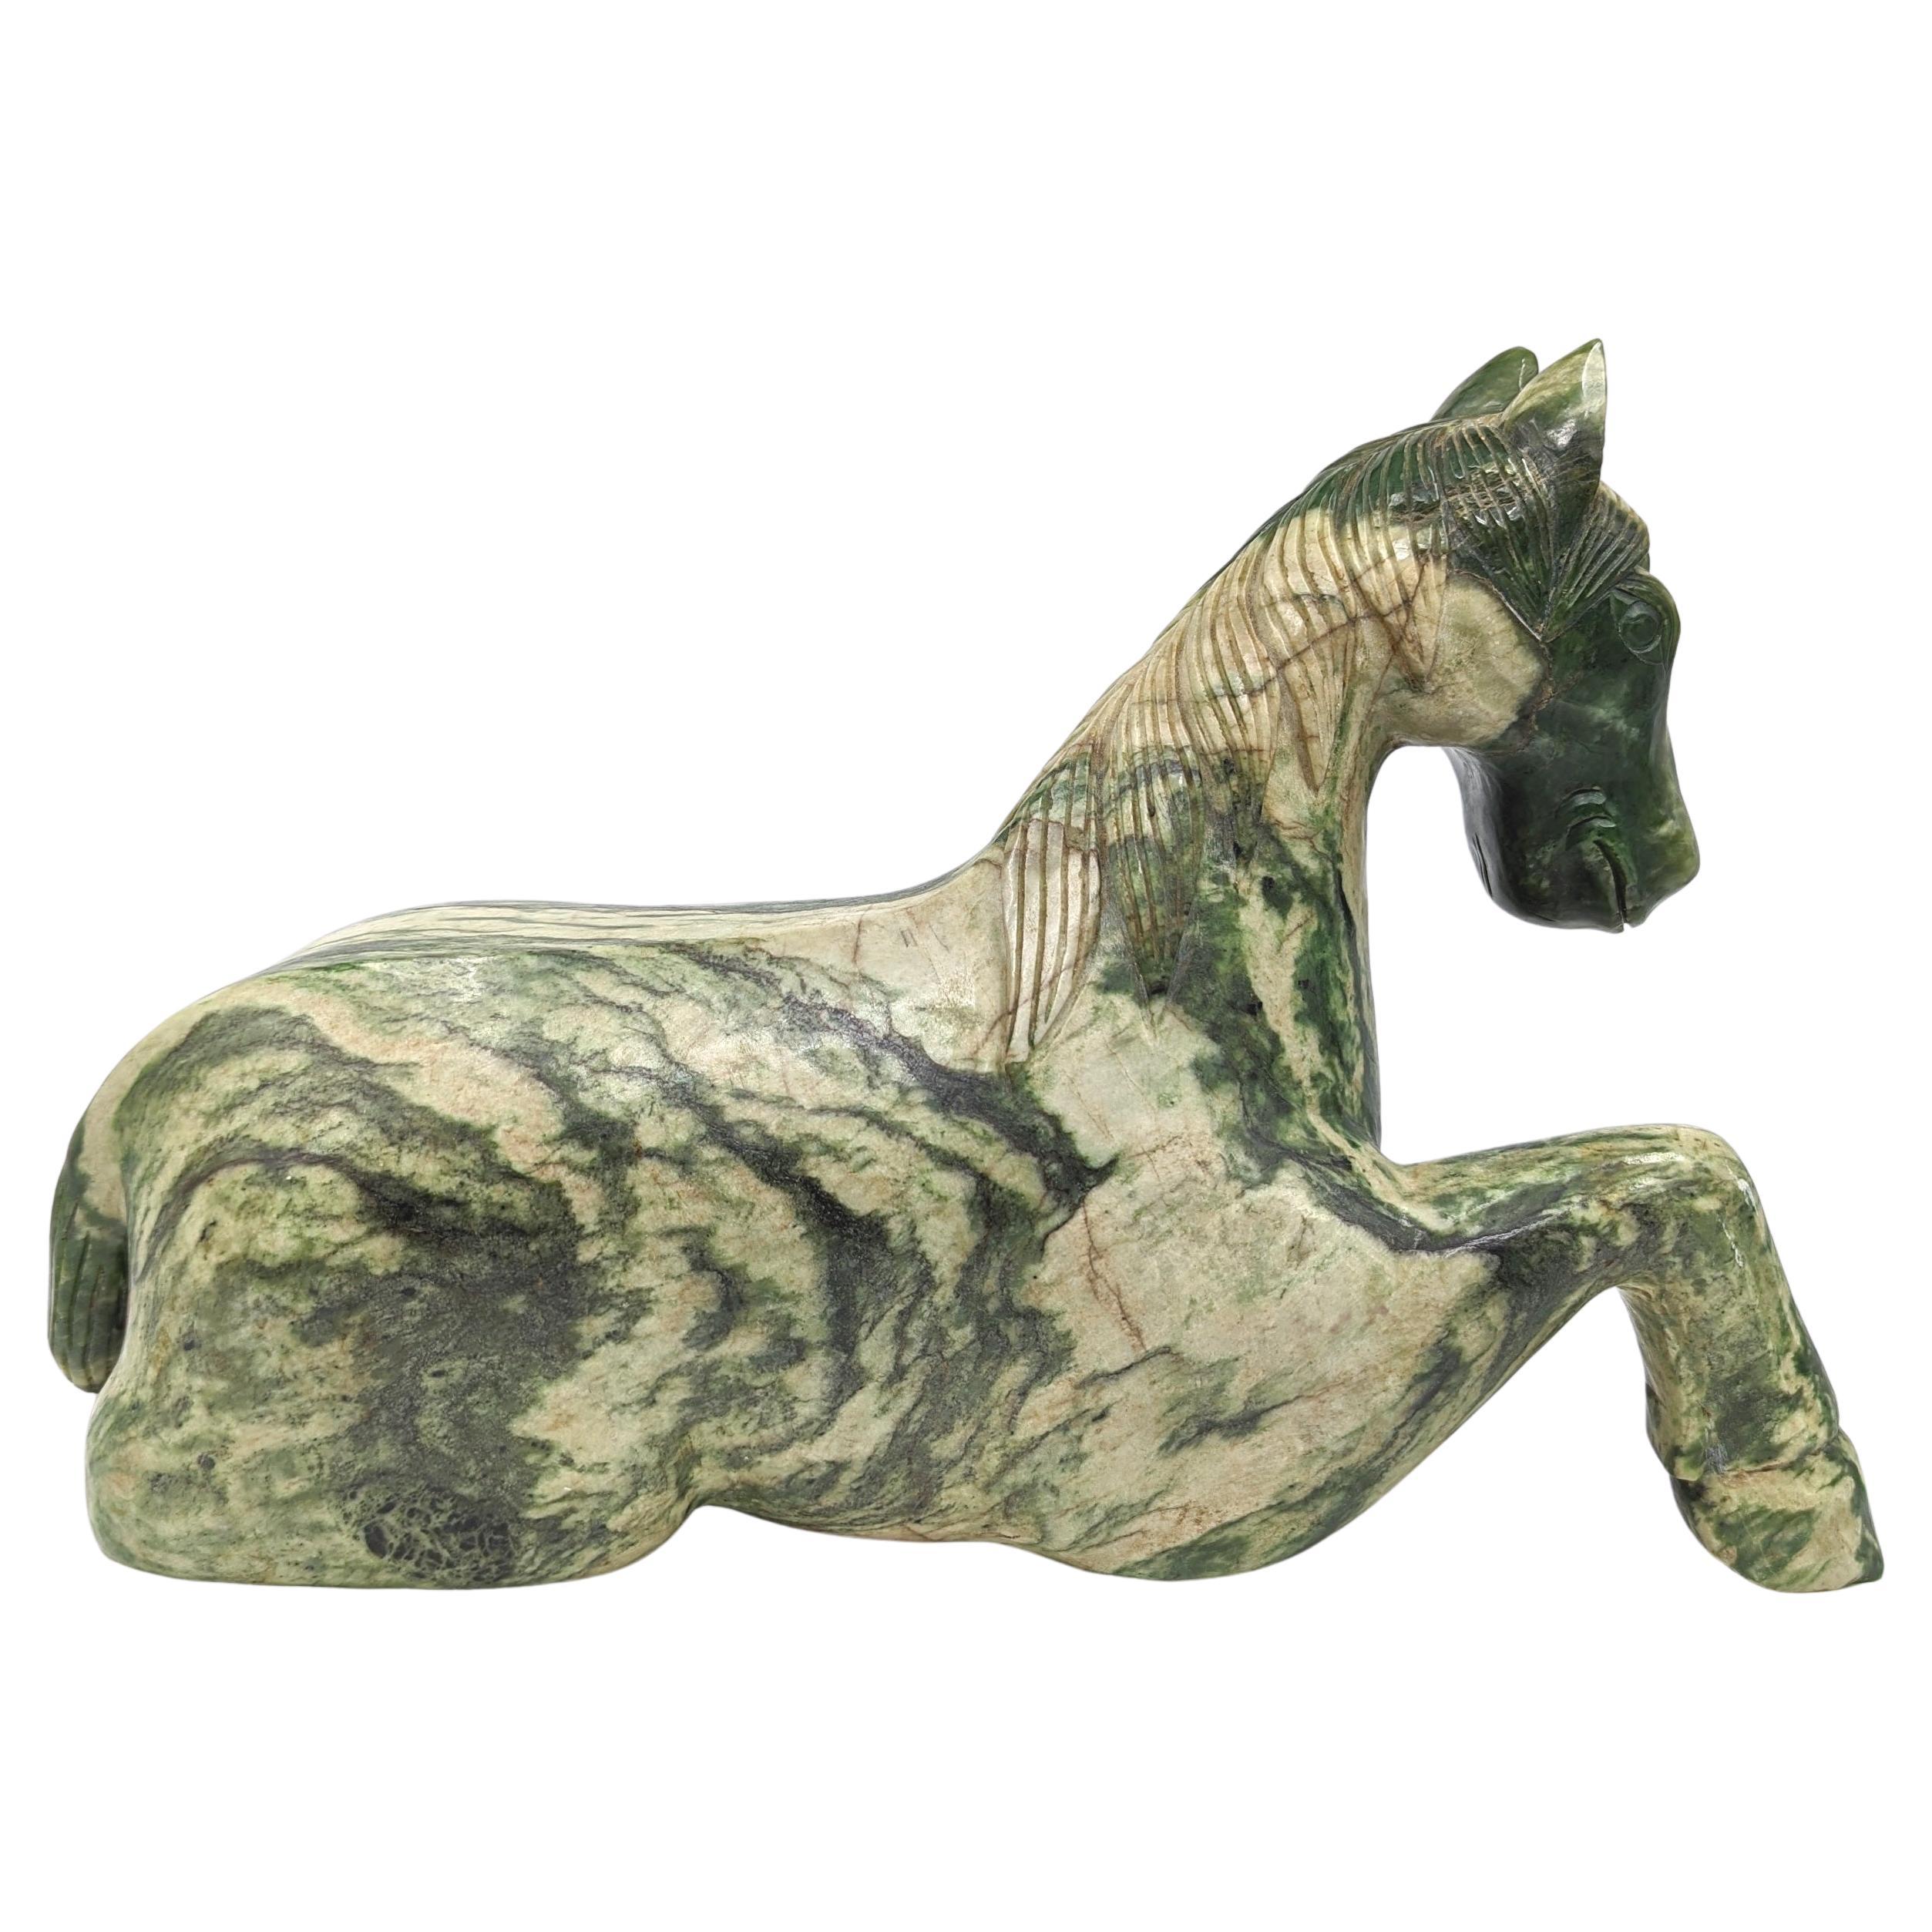 A monumental size (14kg) Chinese recumbent Tang Horse, circa mid to late 20th Century, possibly older. The sculpture is executed in Spinach Jade, a material highly prized for its deep green hue and symbolic significance. The horse is depicted in a